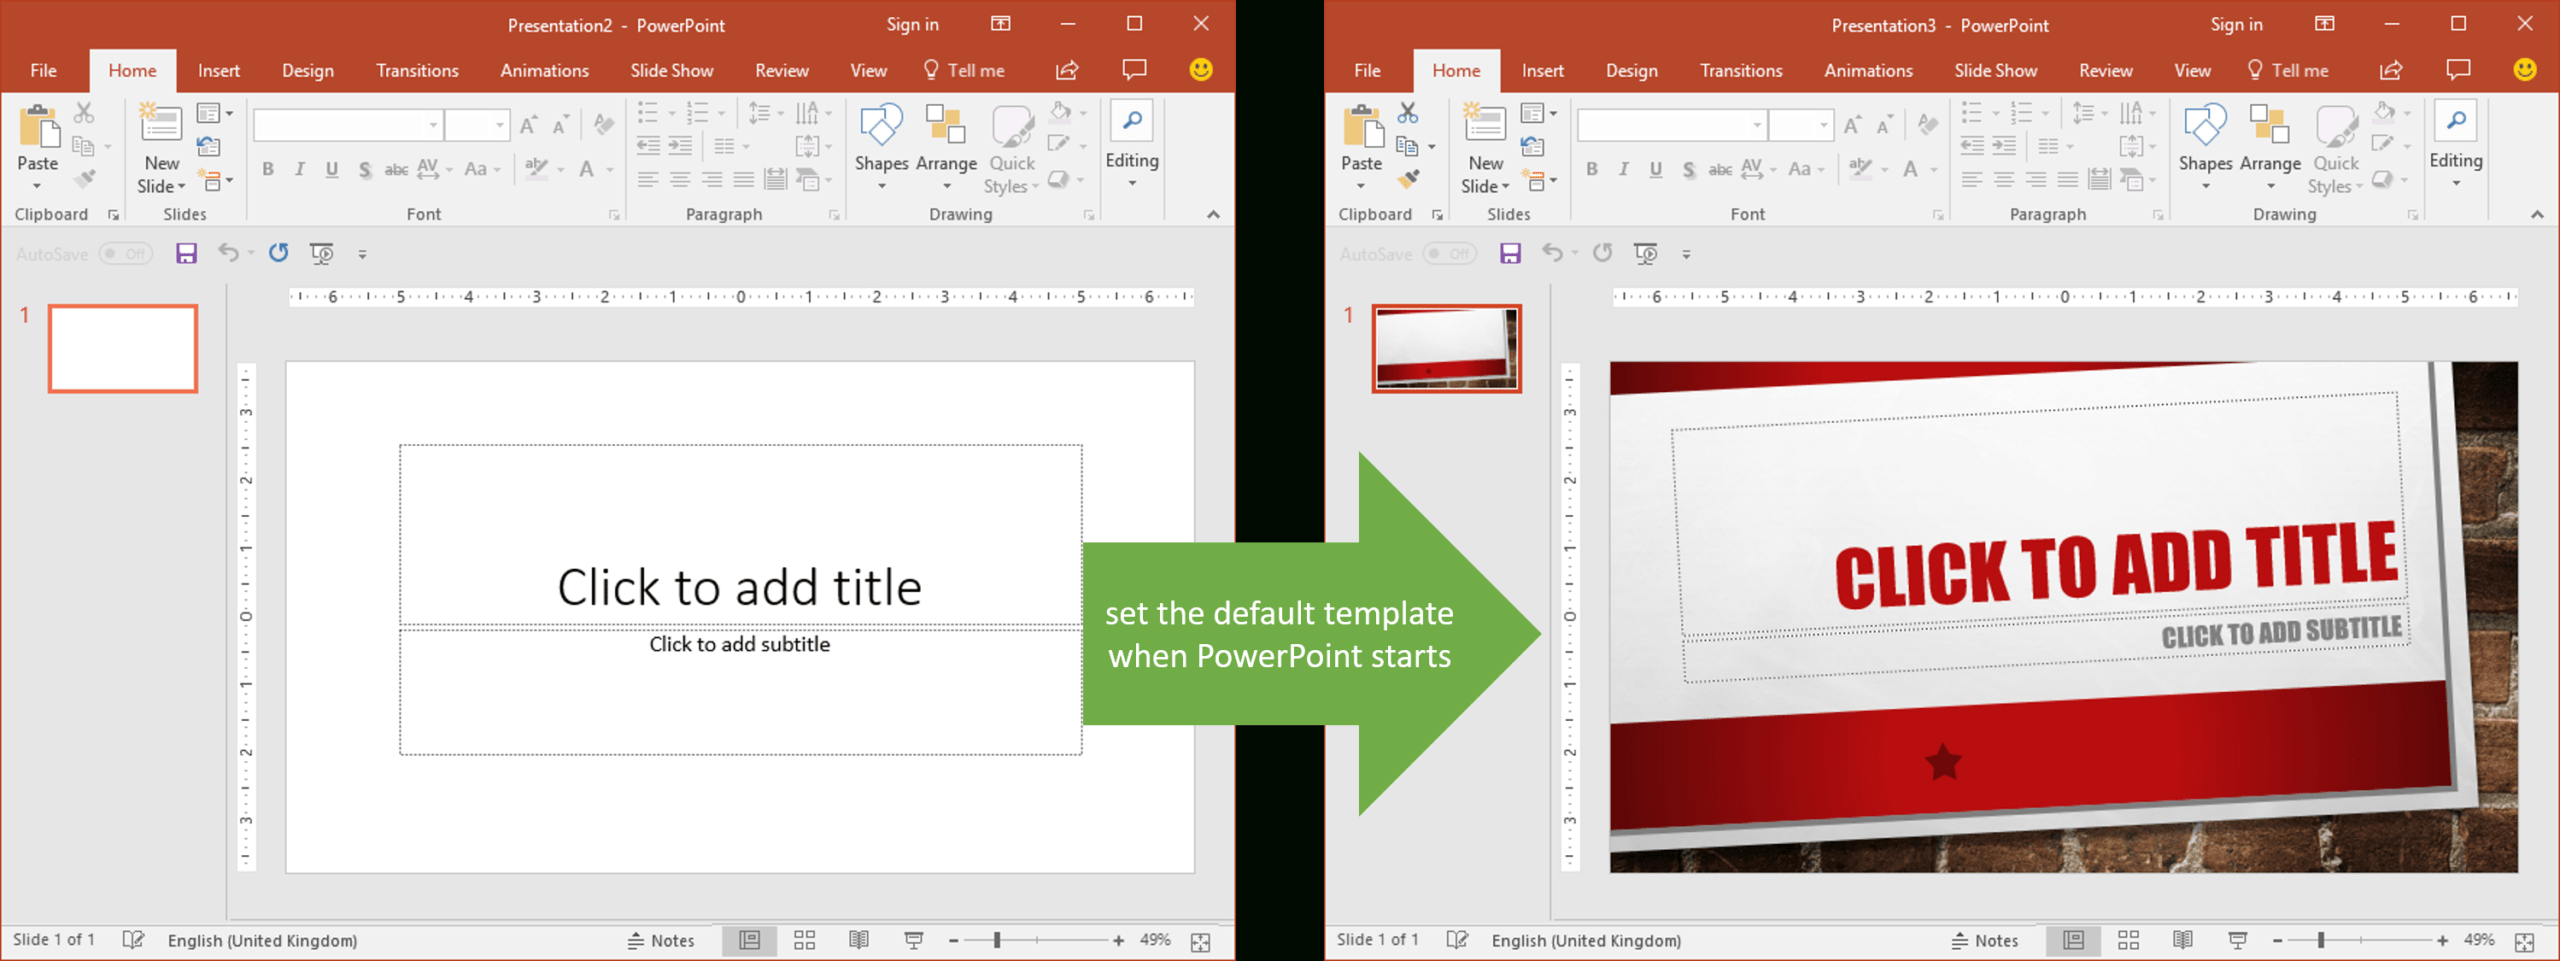 Set The Default Template When Powerpoint Starts | Youpresent With Regard To Powerpoint 2013 Template Location